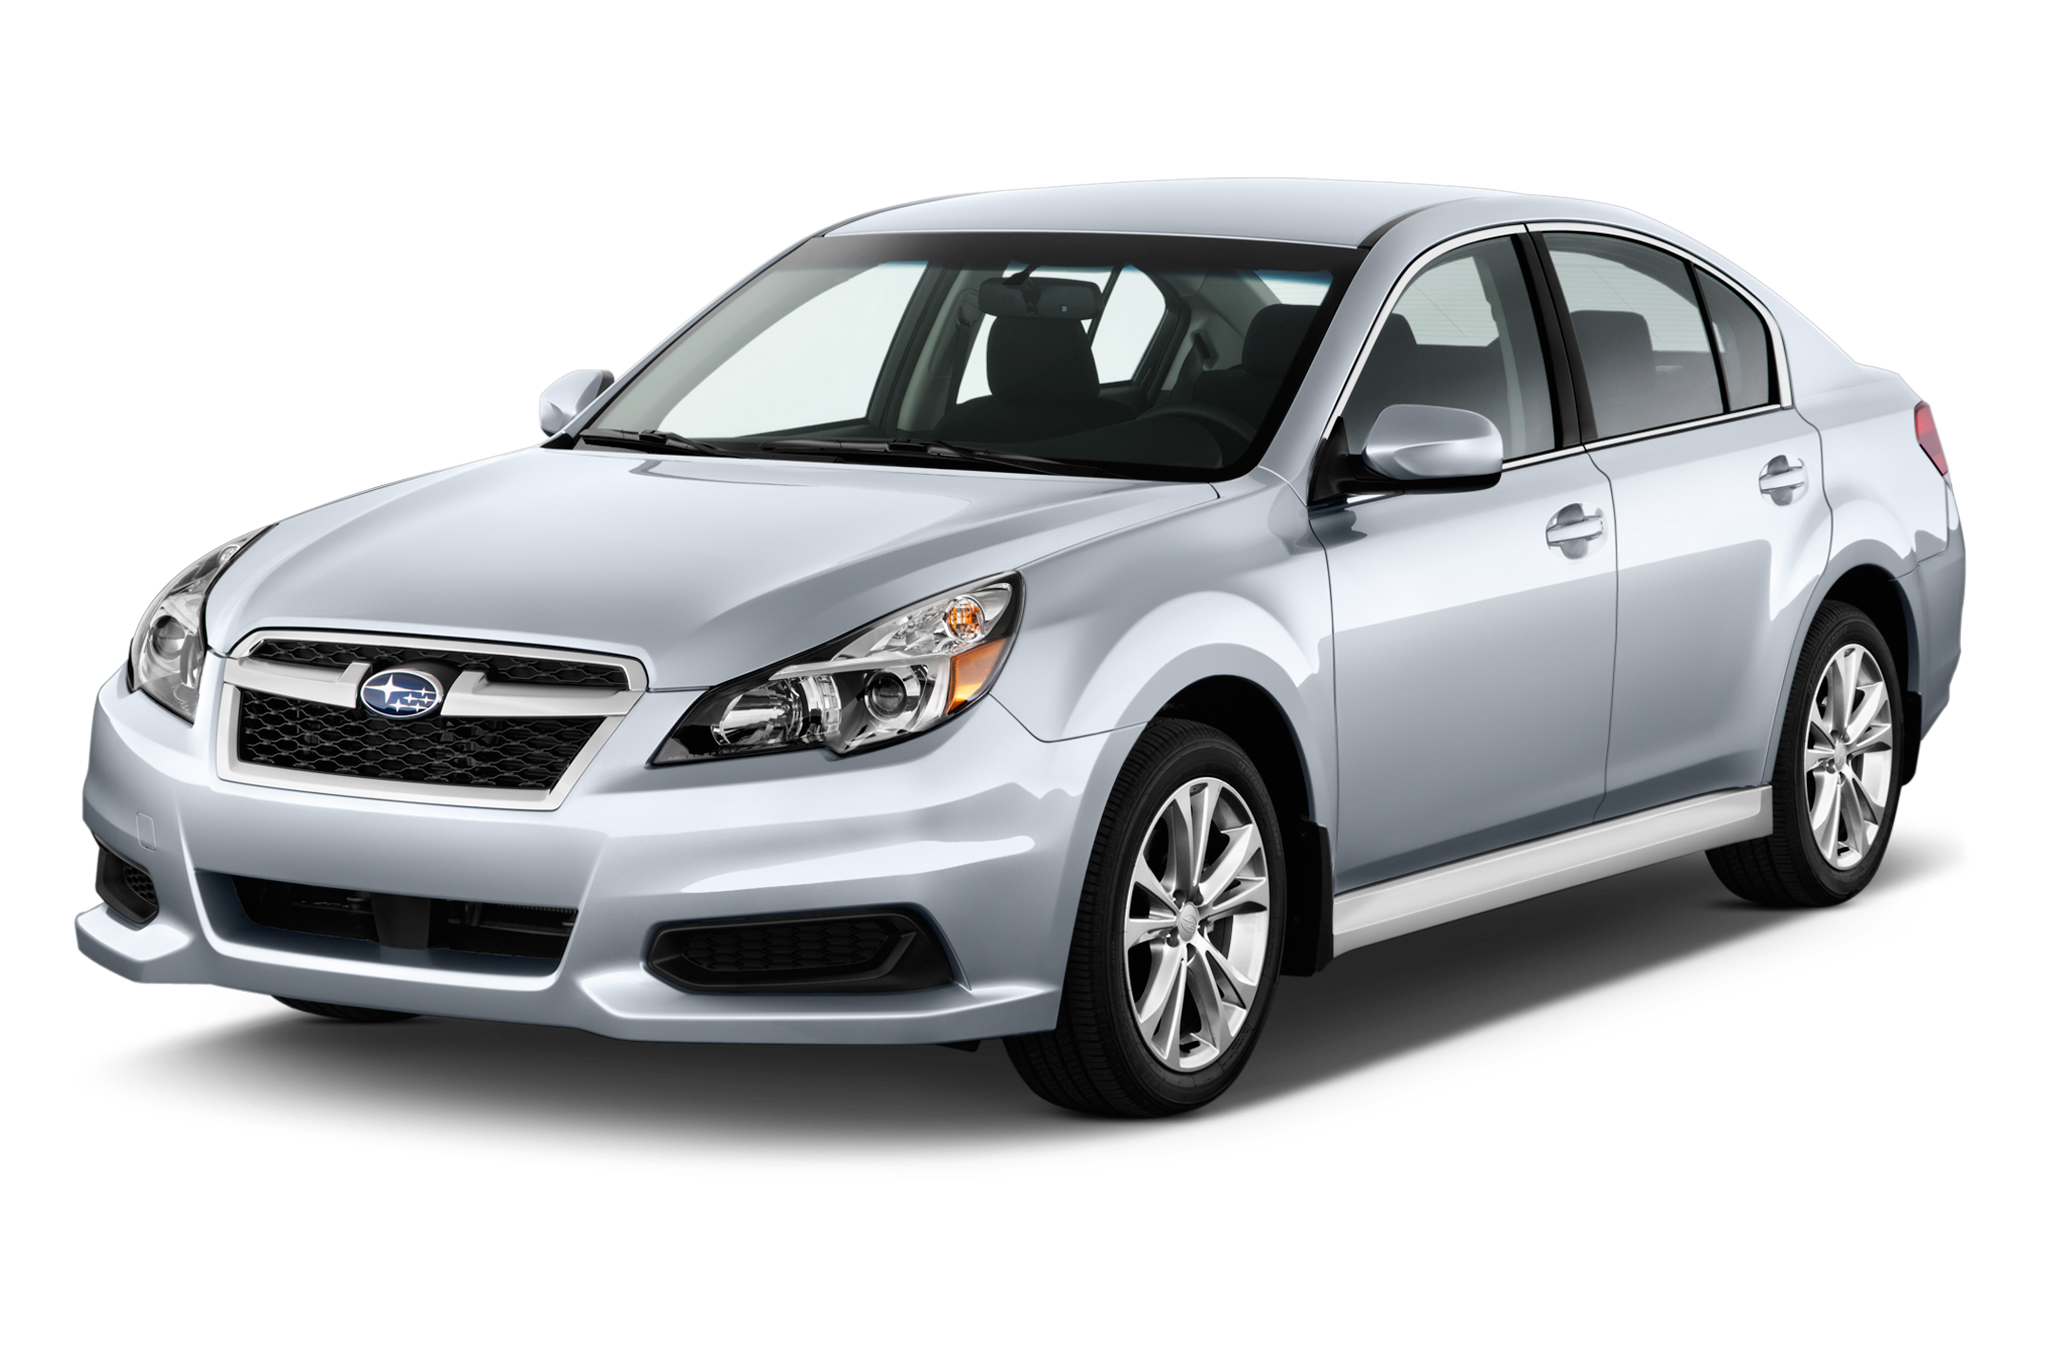 Subaru Legacy 3.6R Limited AT 2014 - International Price & Overview